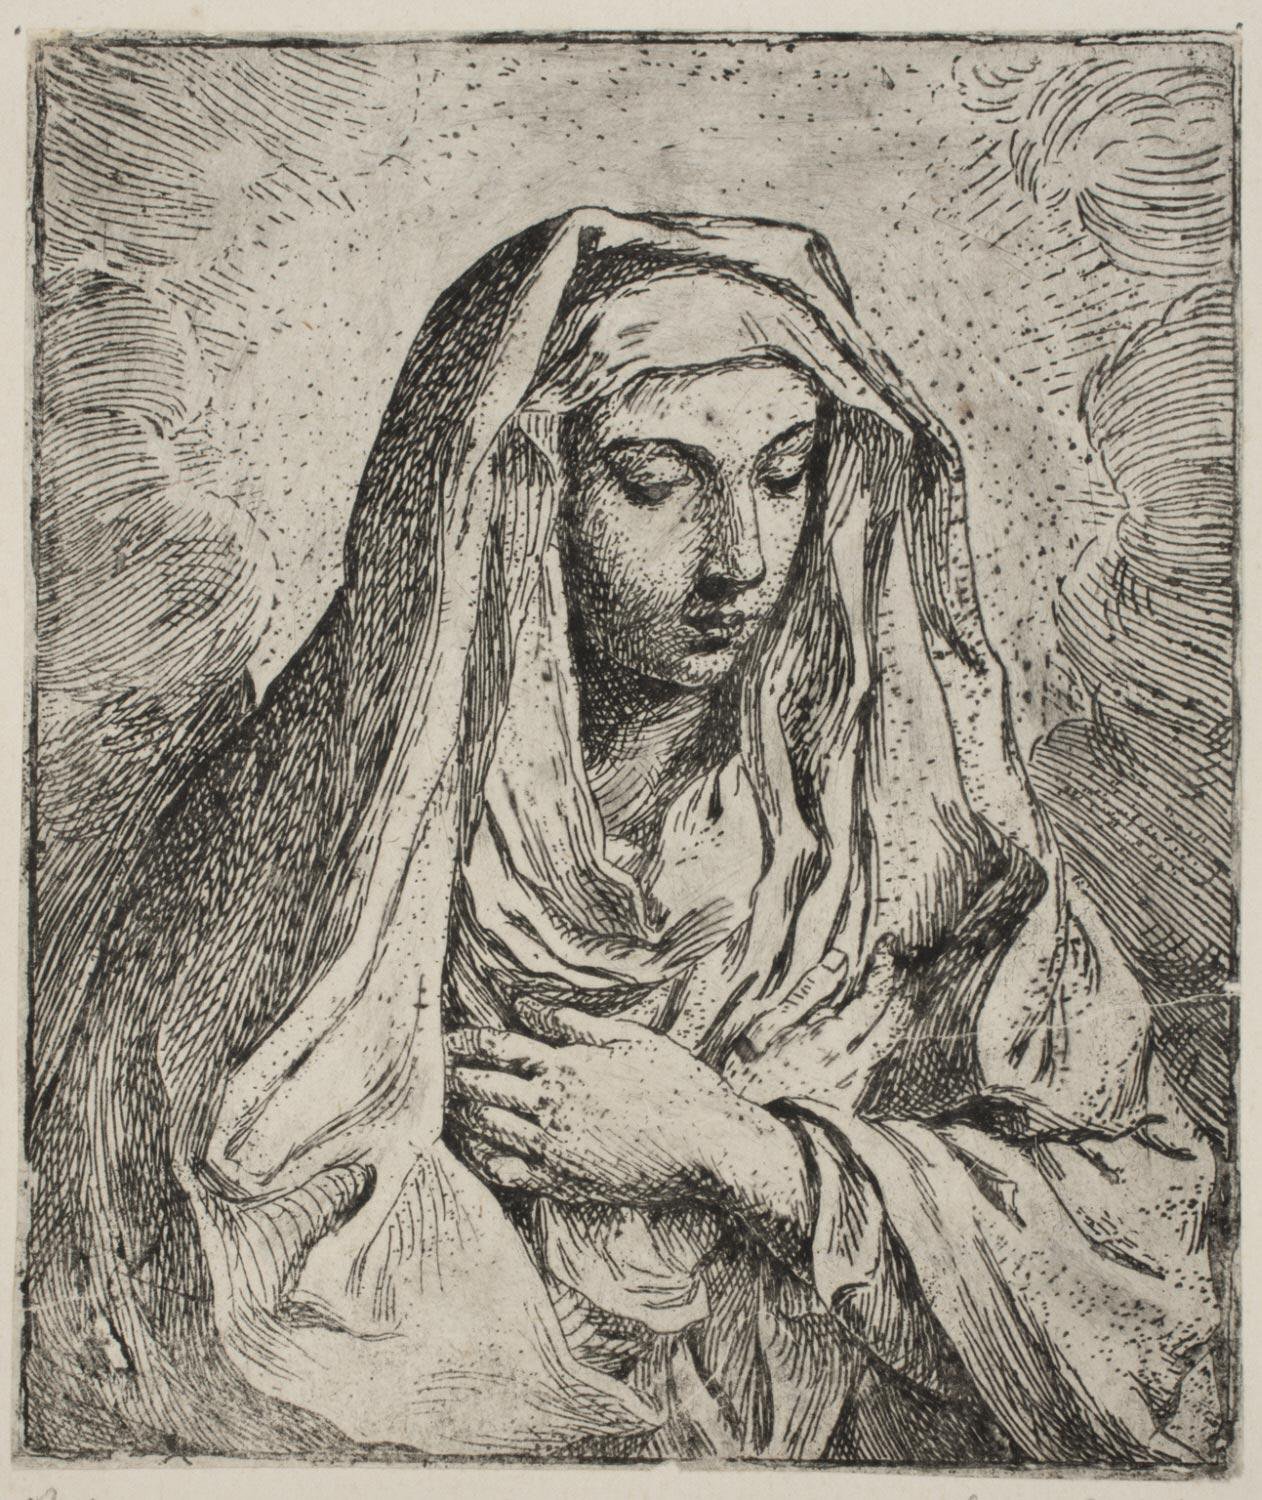 A bust-length, printed image of the Virgin Mary. She is draped in a shawl and crosses her arms at the wrist across her chest. She looks down with her eyes closed, as though lost in thought or prayer. Behind her, the rough illusion of clouds fills the background. 